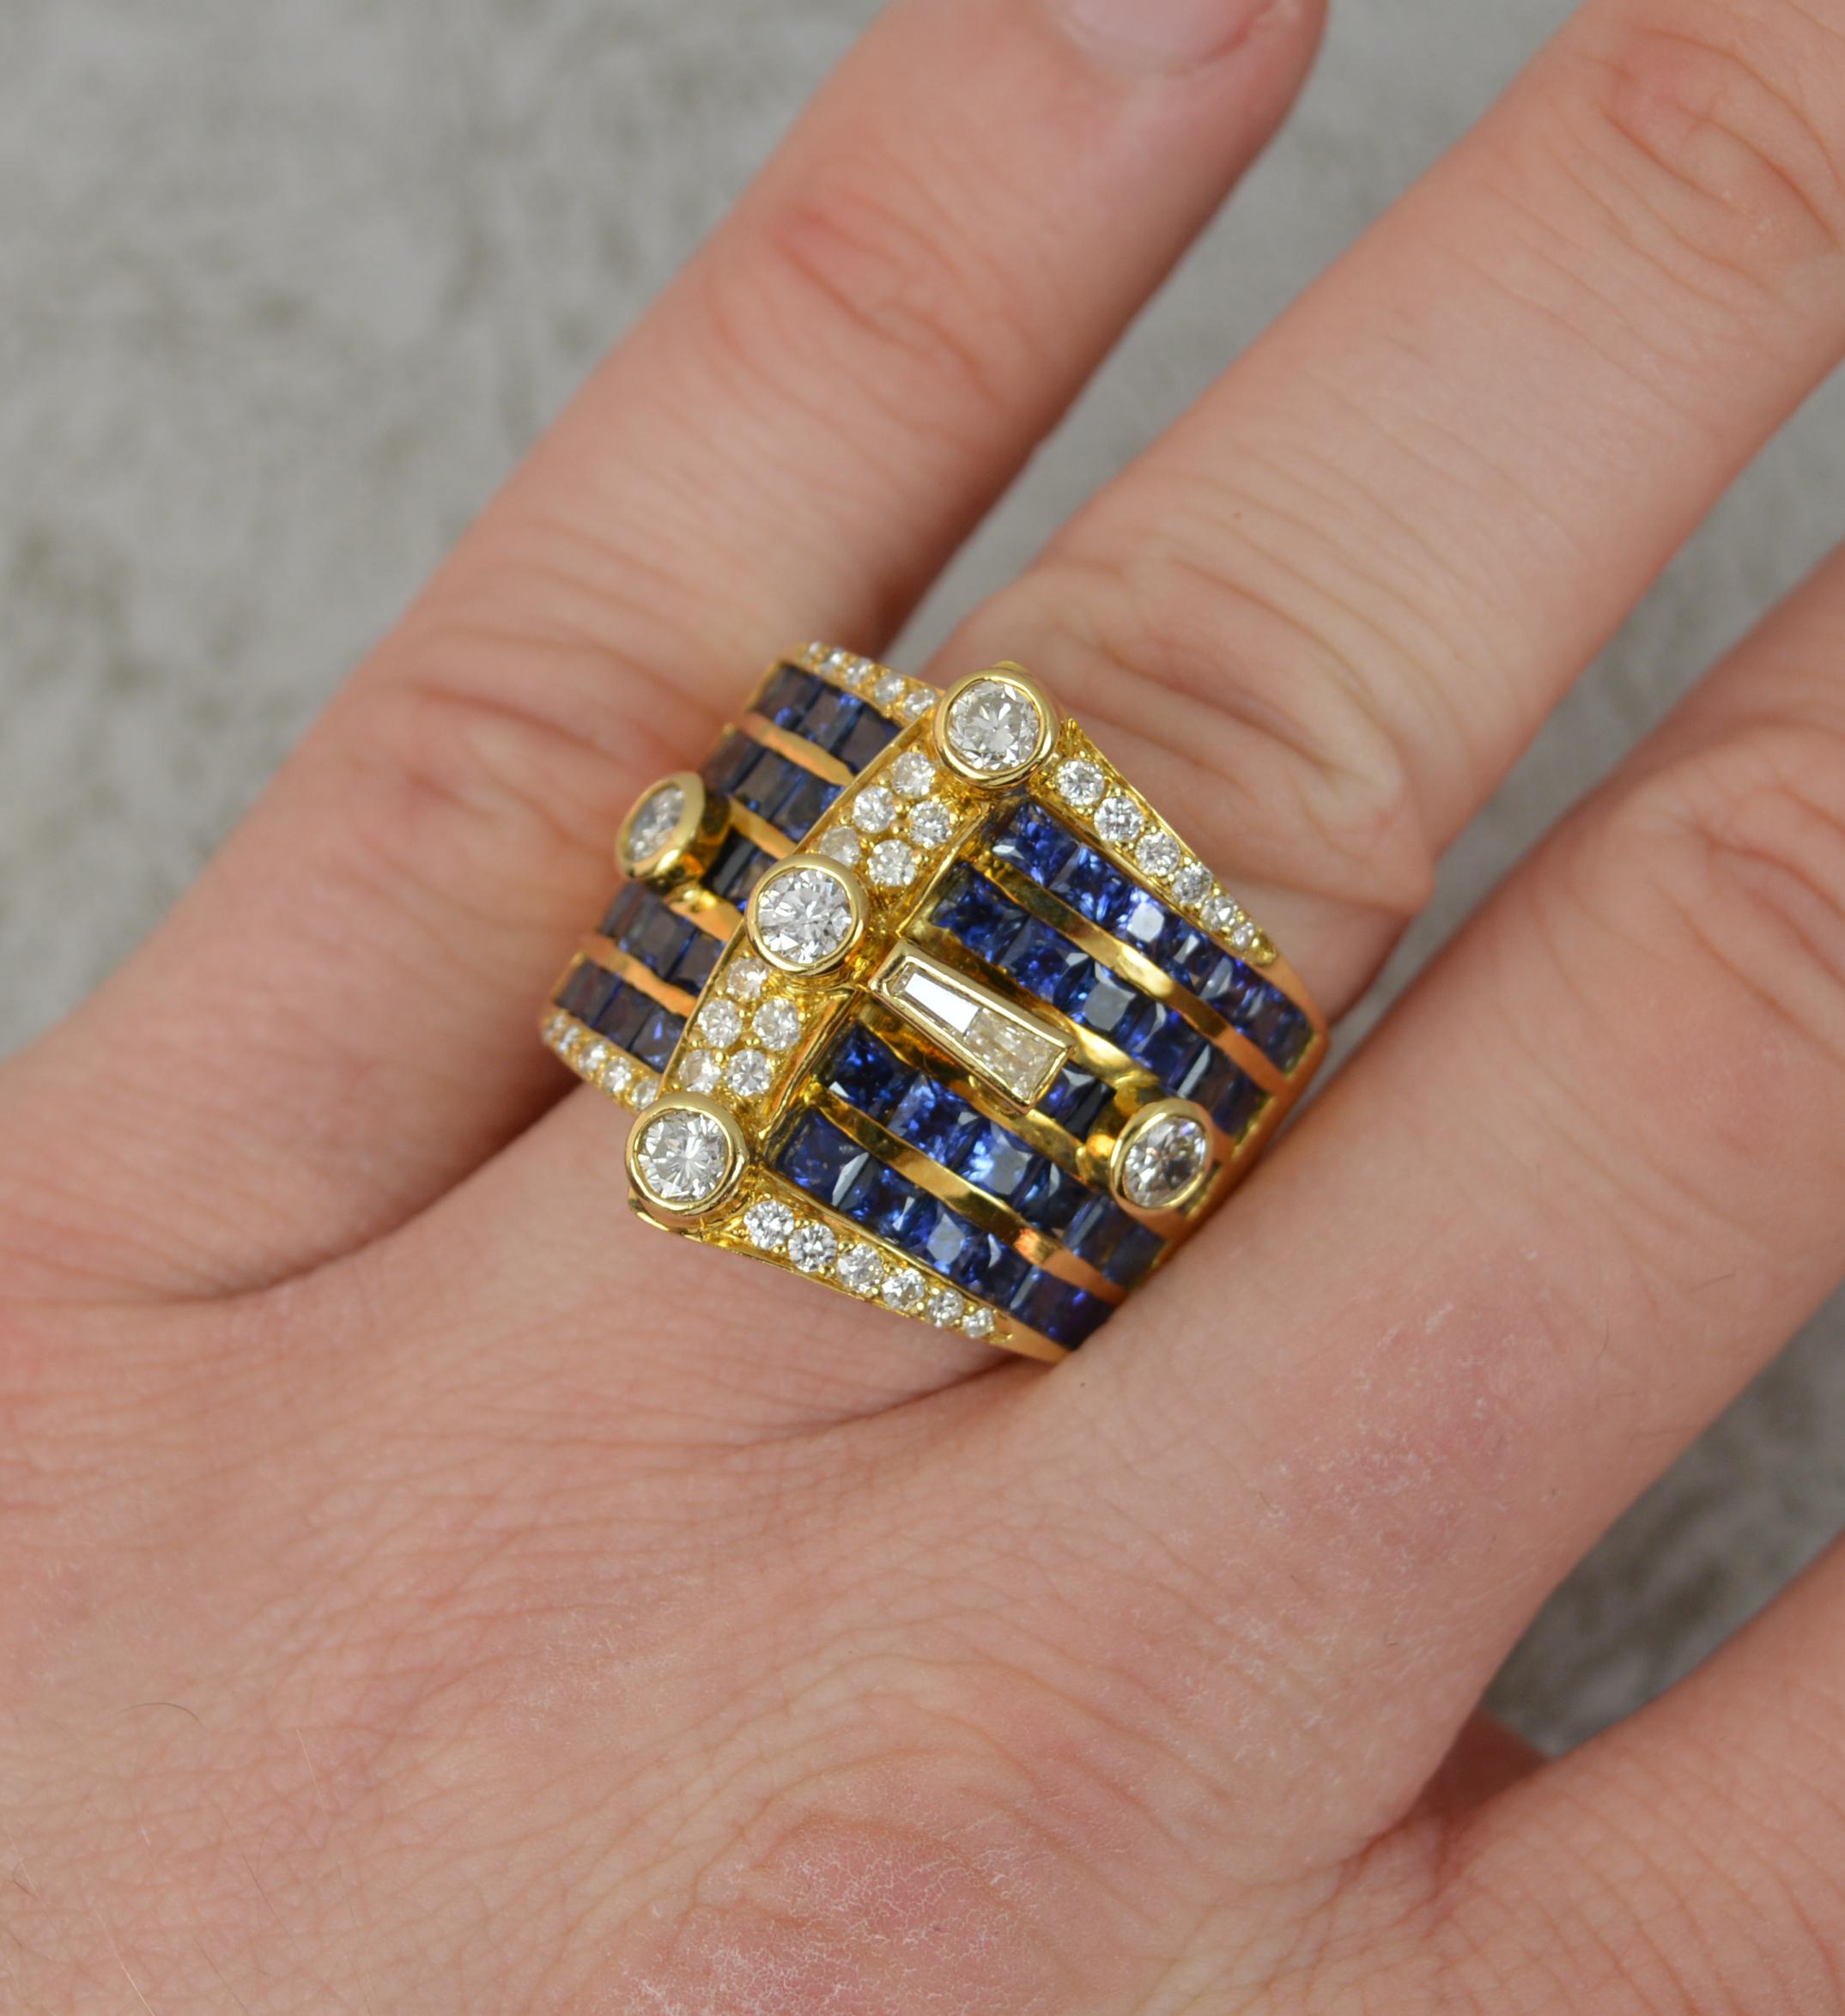 A stunning and over sized 18ct gold, sapphire and diamond ring.
Buckle shape design. Exceedingly heavy.
Set with many round brilliant cut diamonds, Vs clarity, 1.3cts total and five rows of princess cut blue sapphires.
22mm spread of stones, 22mm